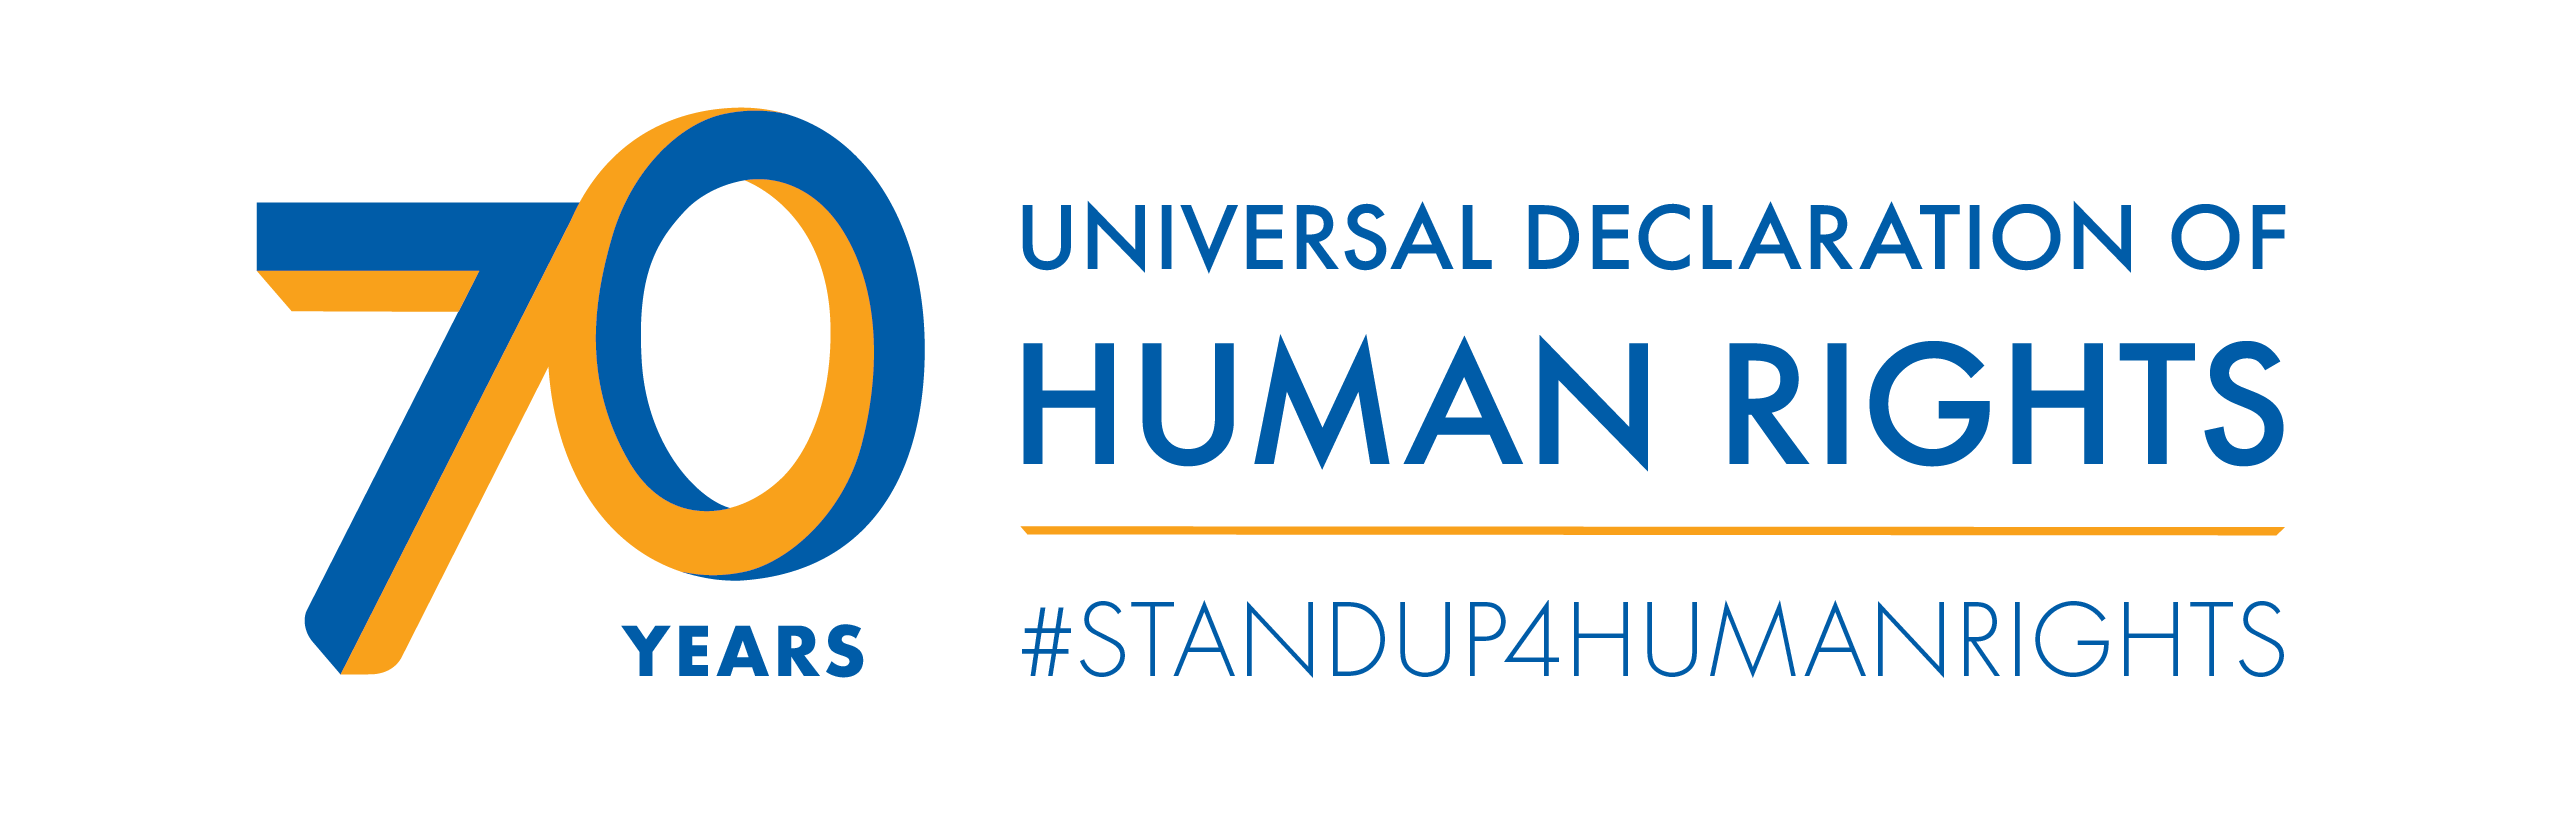 stand-up-for-human-rights-for-everyone-everywhere-un-chief